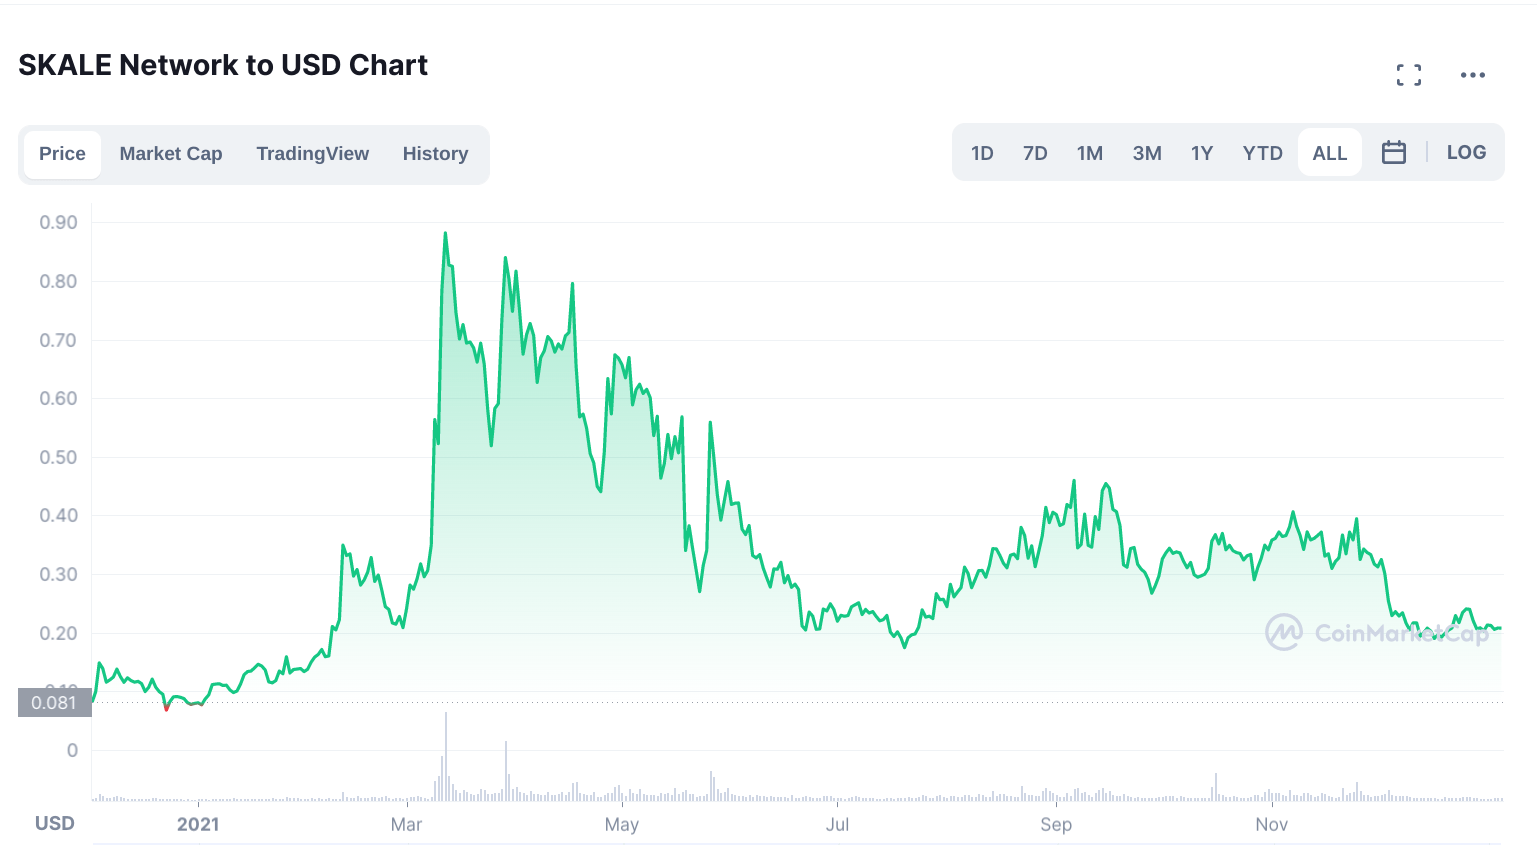 SKL/USD Price since its first public listing